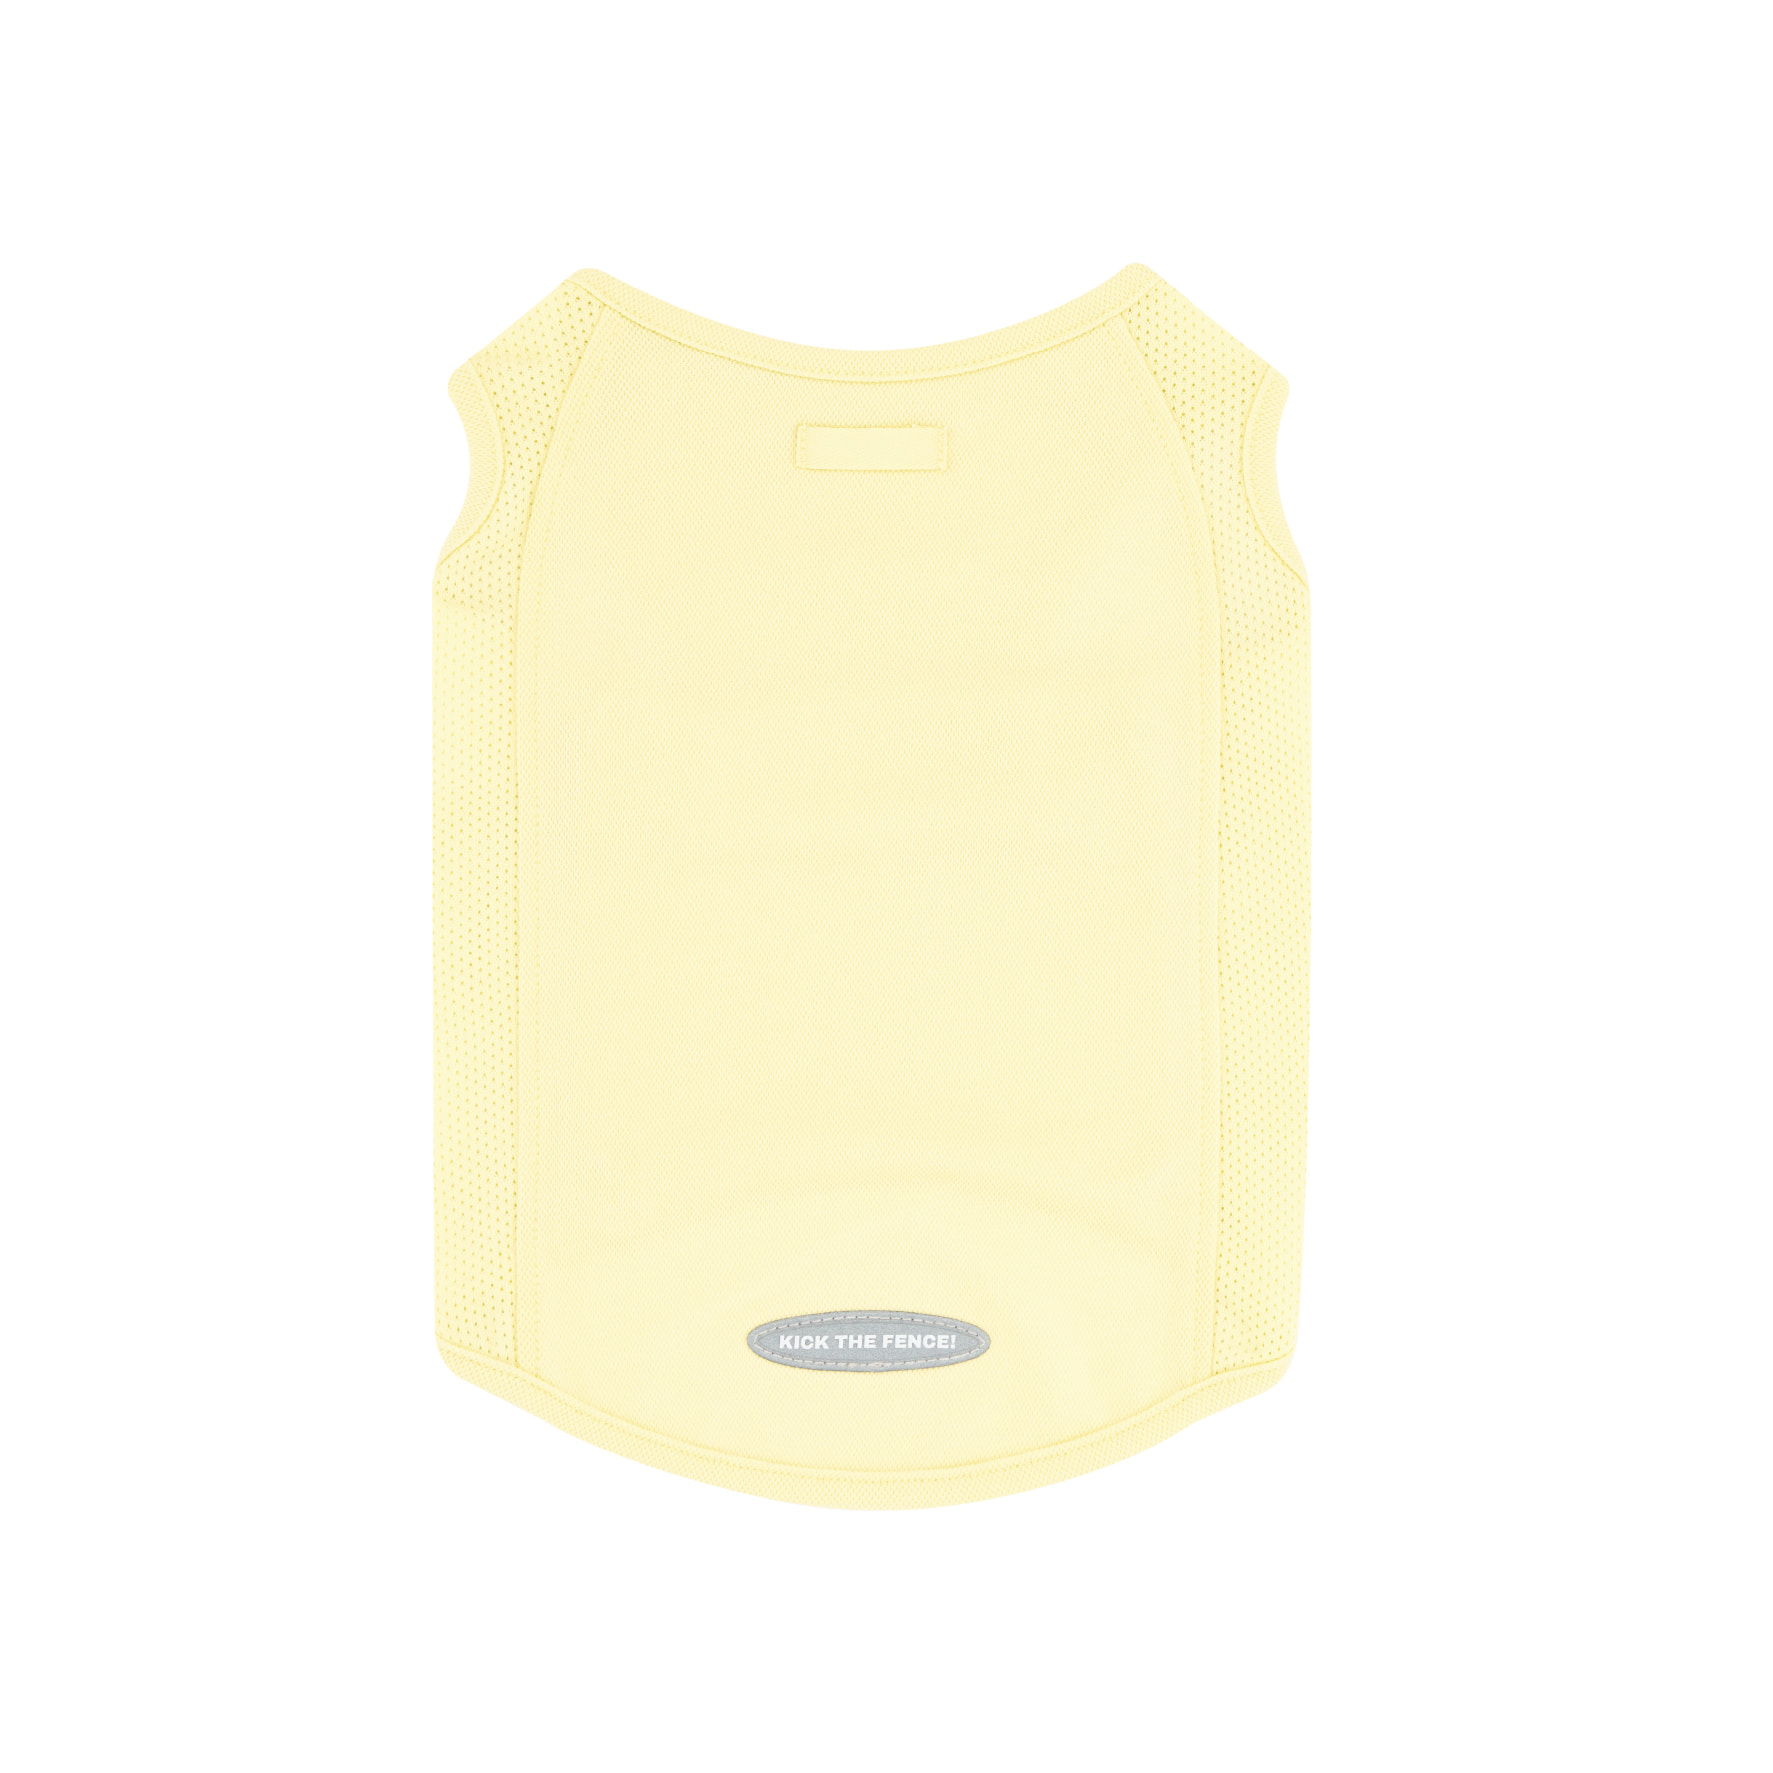 STANDARD SUMMER COOLING SLEEVELESS (YELLOW) - KICK THE FENCE